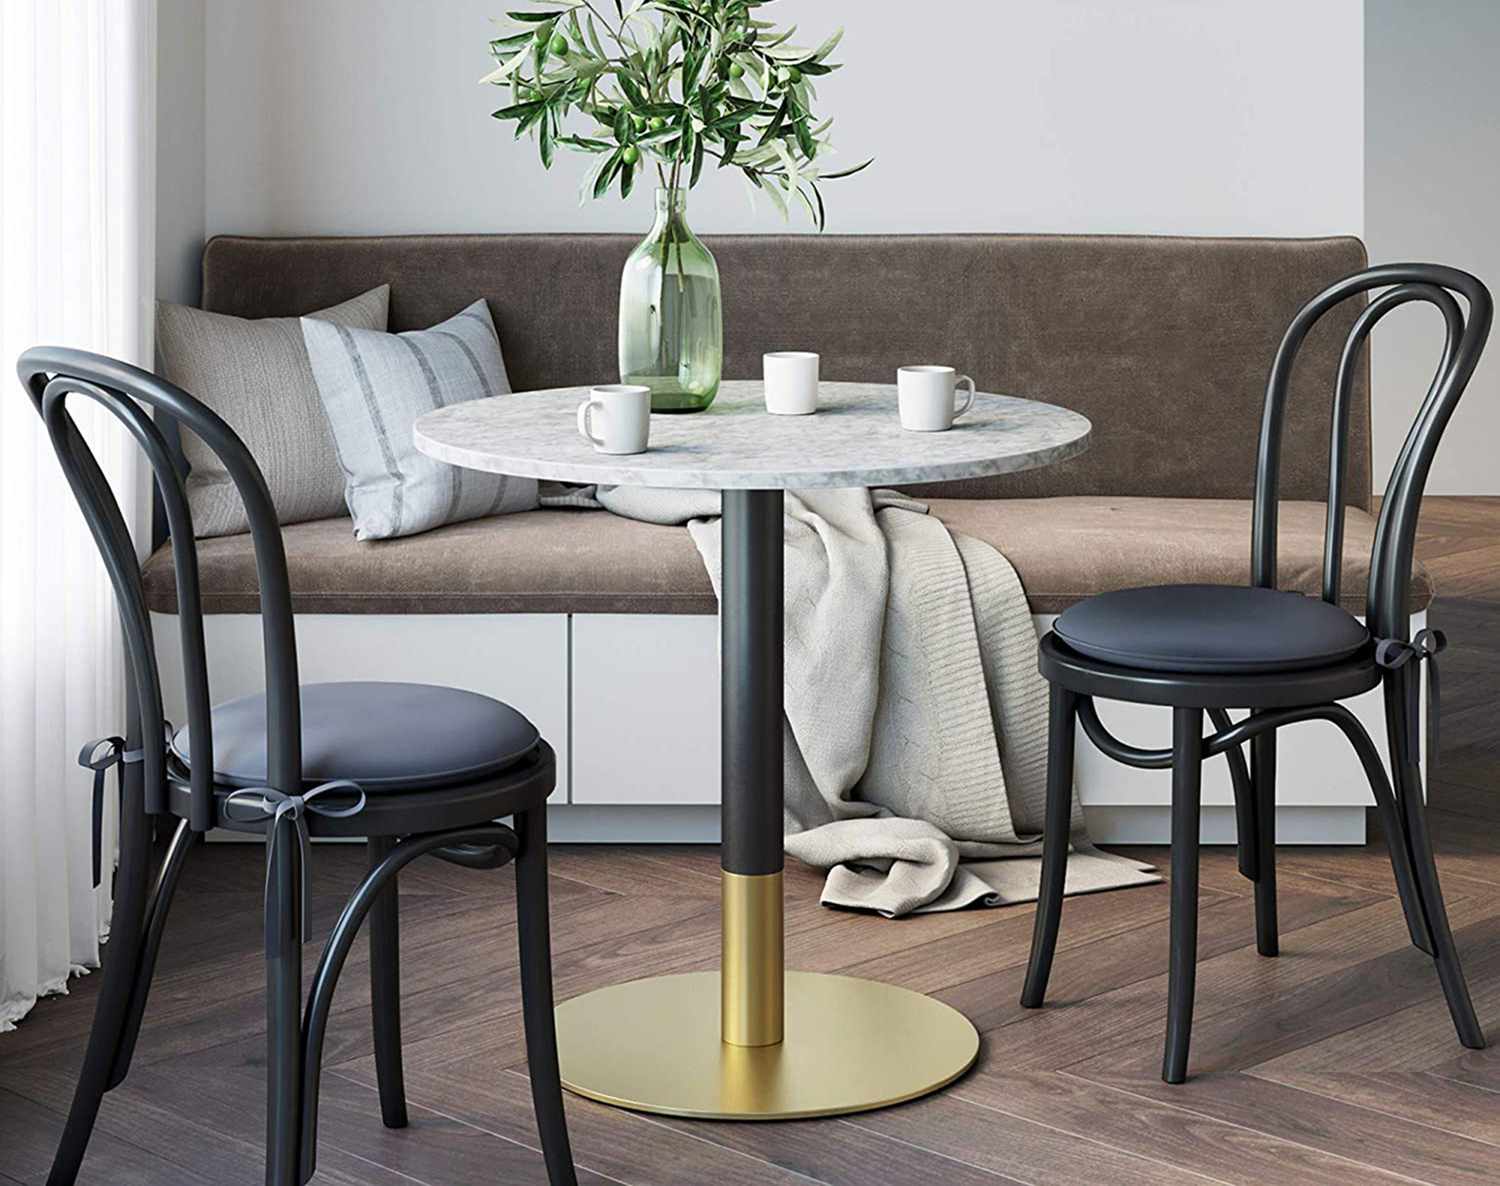 8 Best Dining Tables For Small Spaces, Dining Room Tables For Narrow Spaces